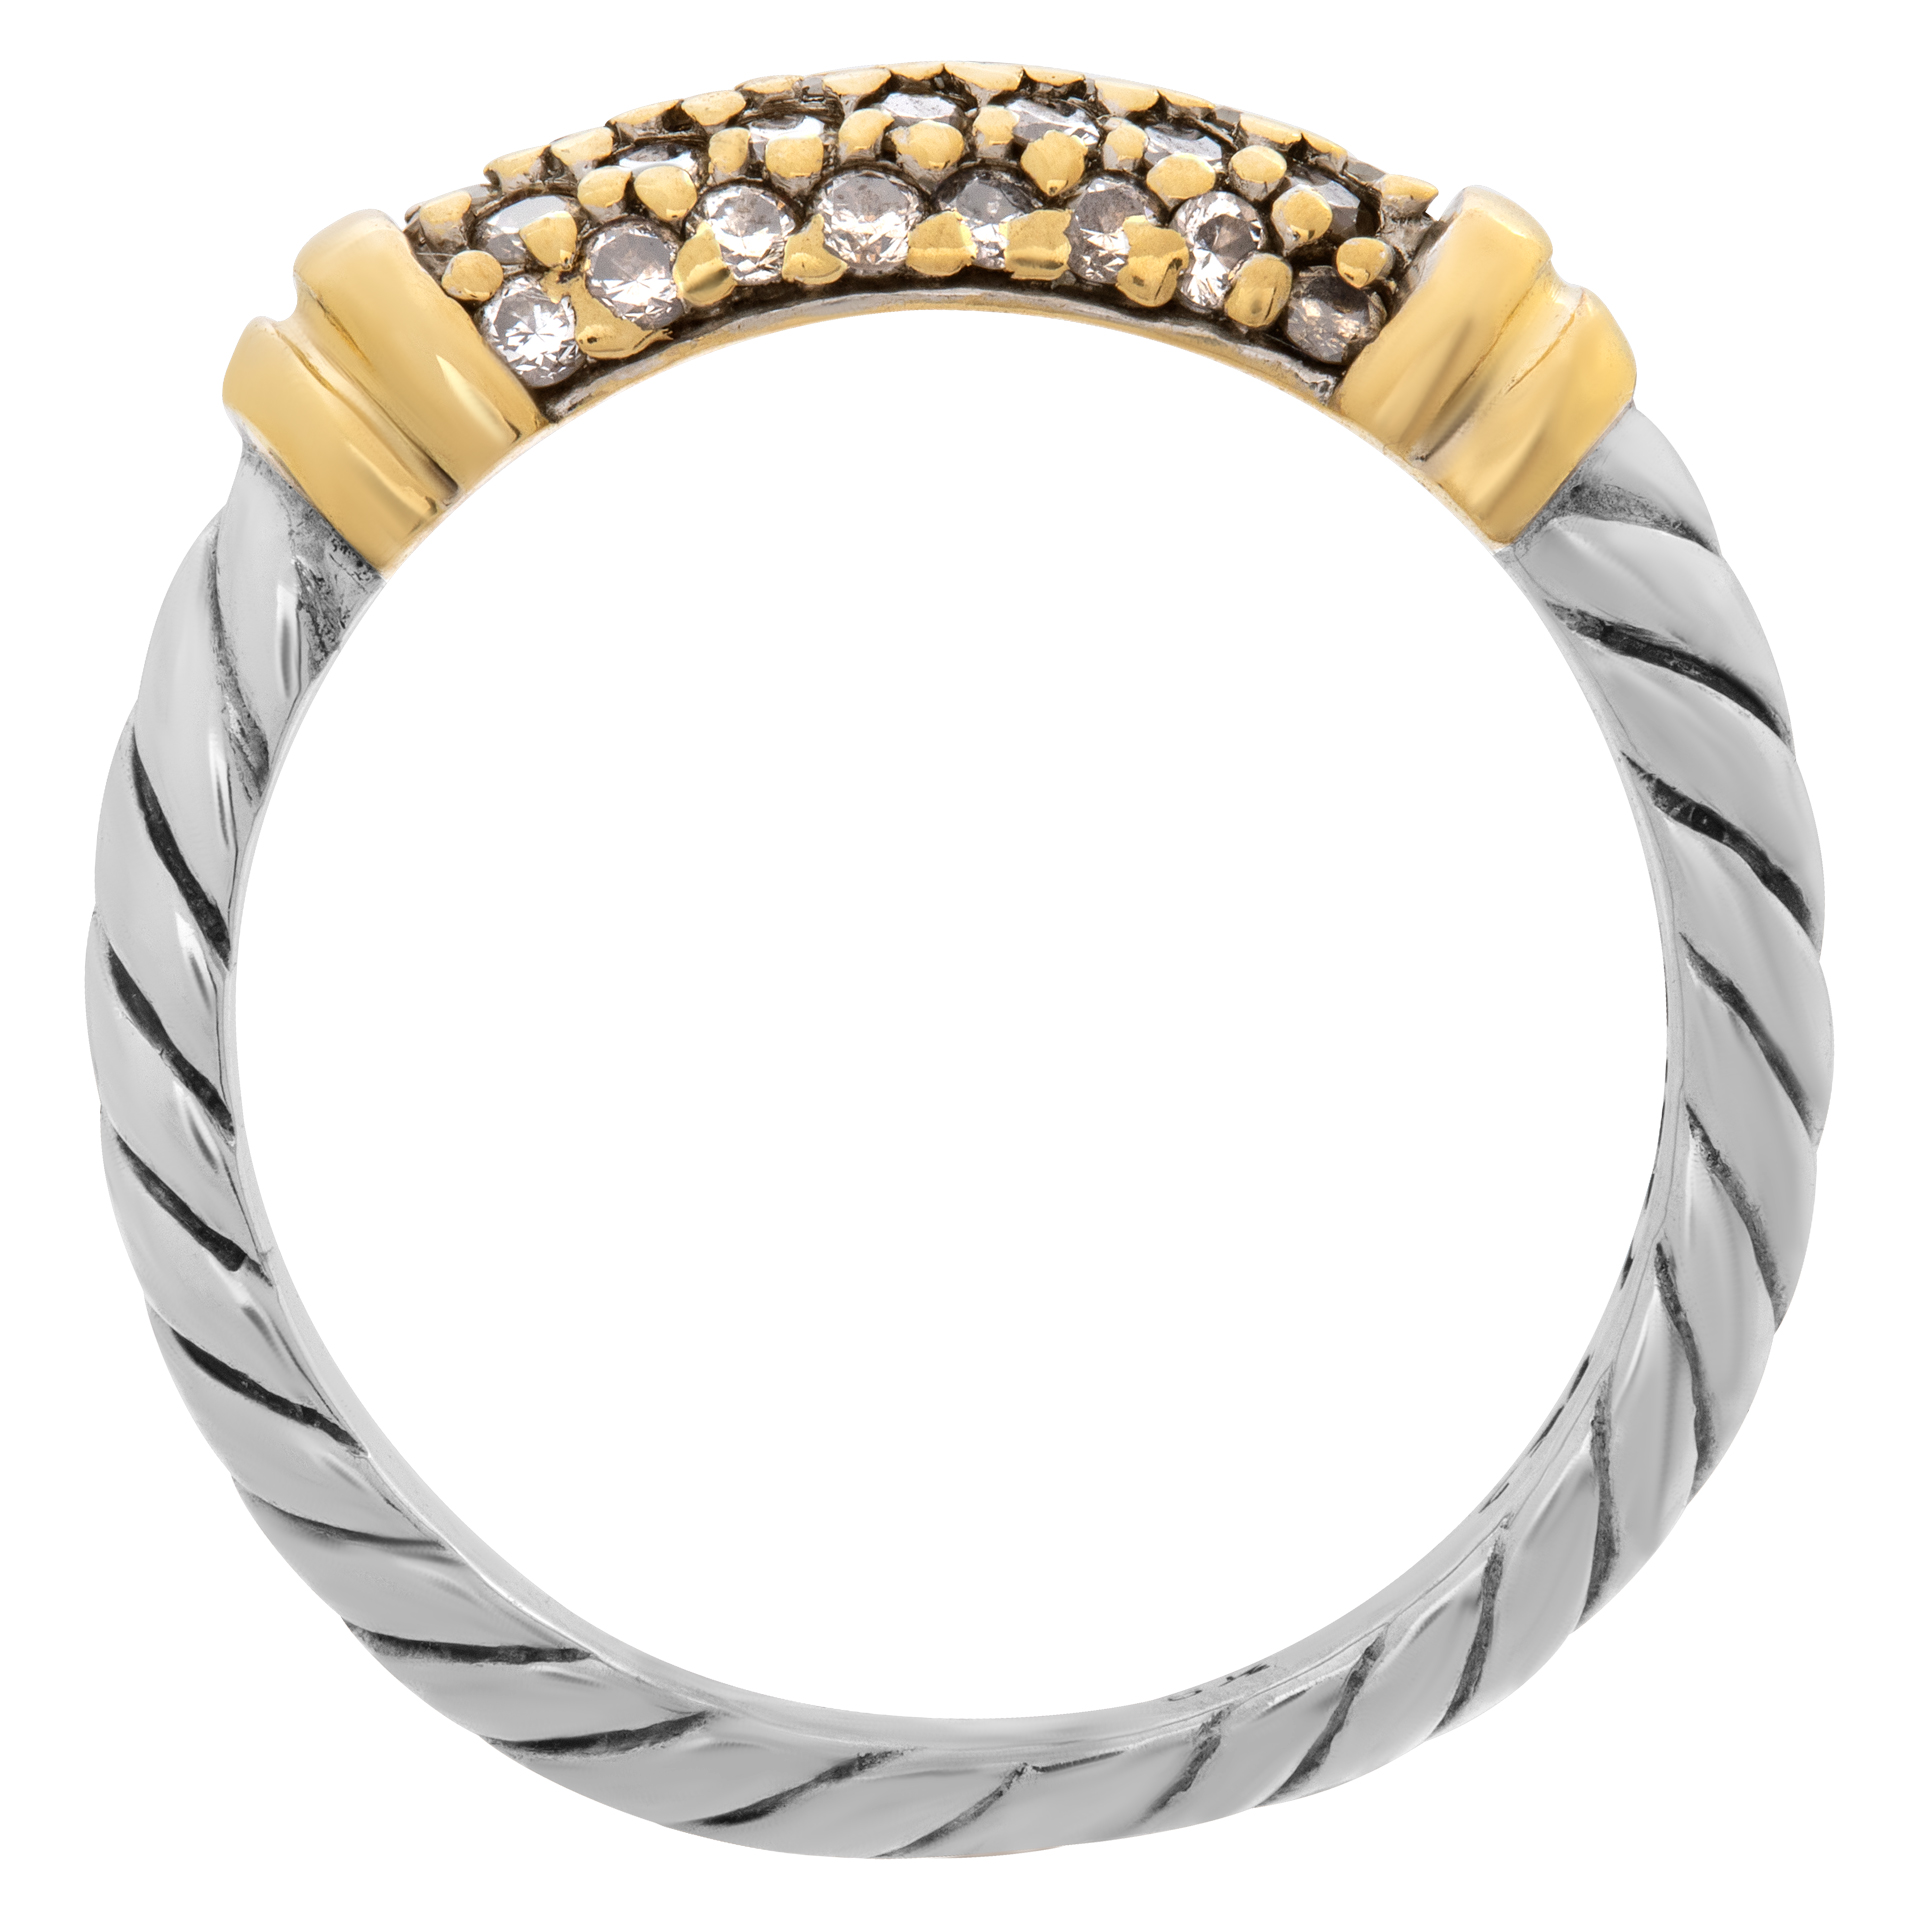 David Yurman Cable Ring With Diamond Accents image 4